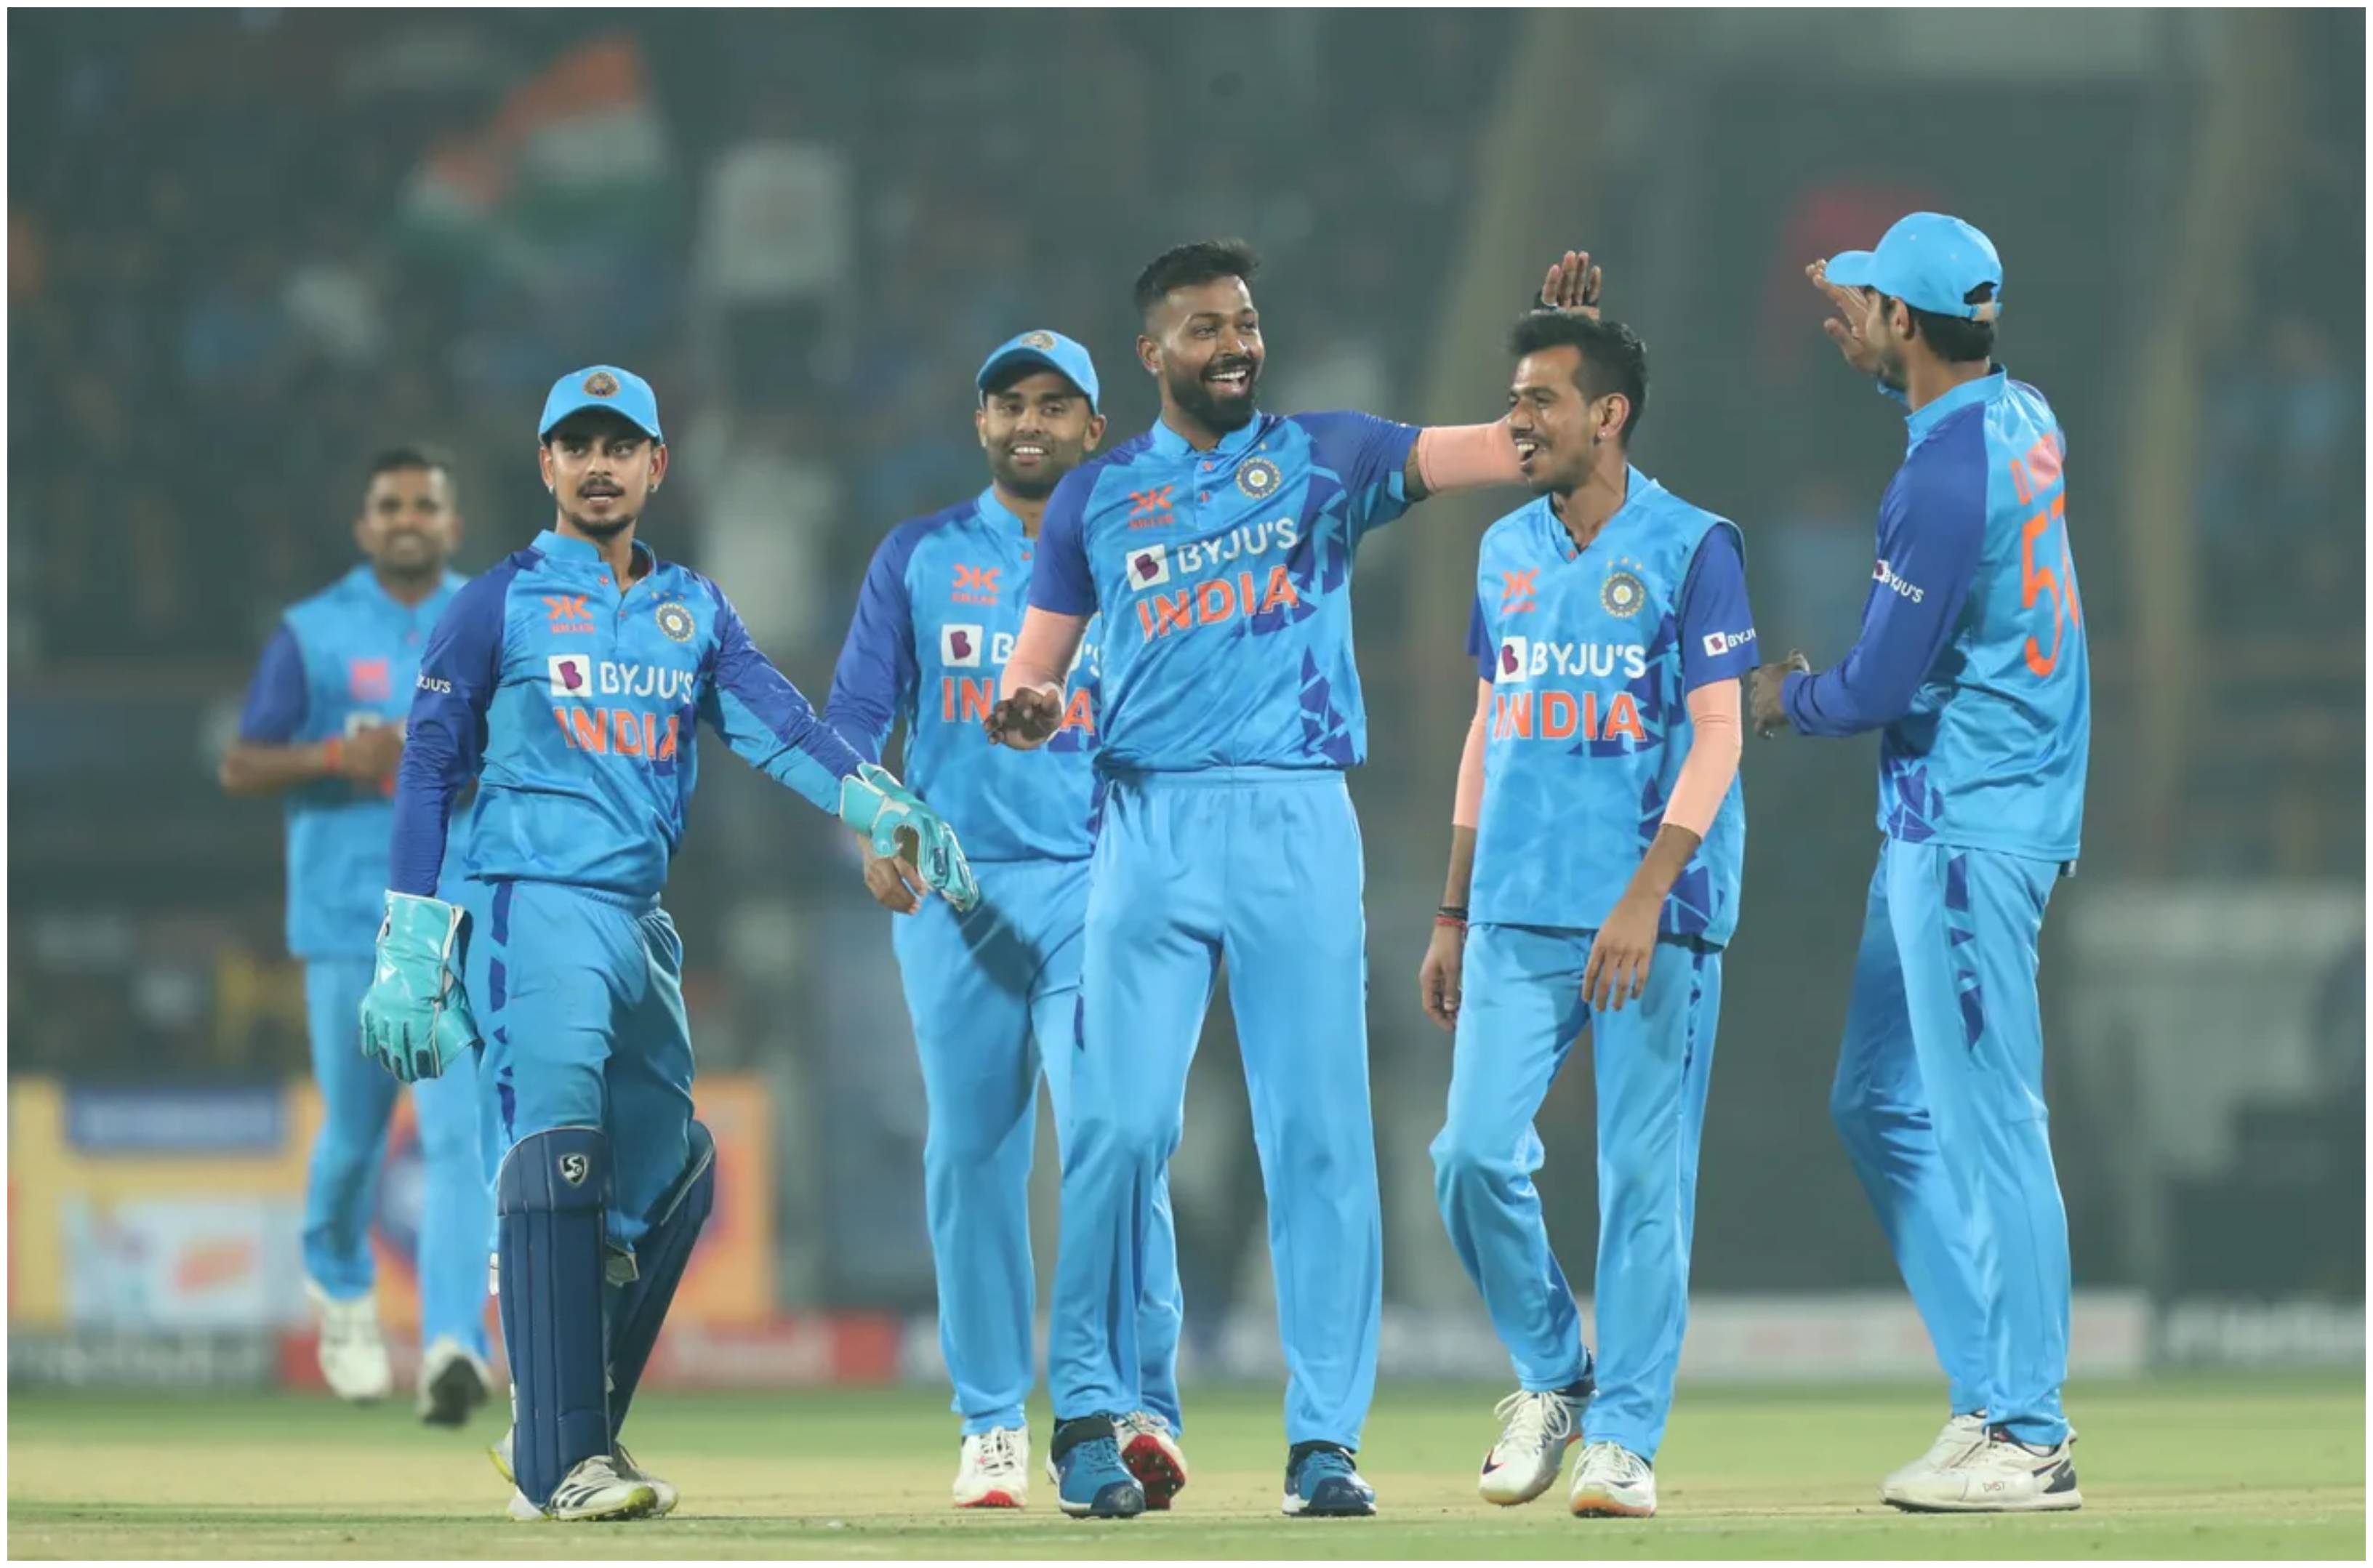 India outplayed Sri Lanka in the series-deciding third T20I | BCCI